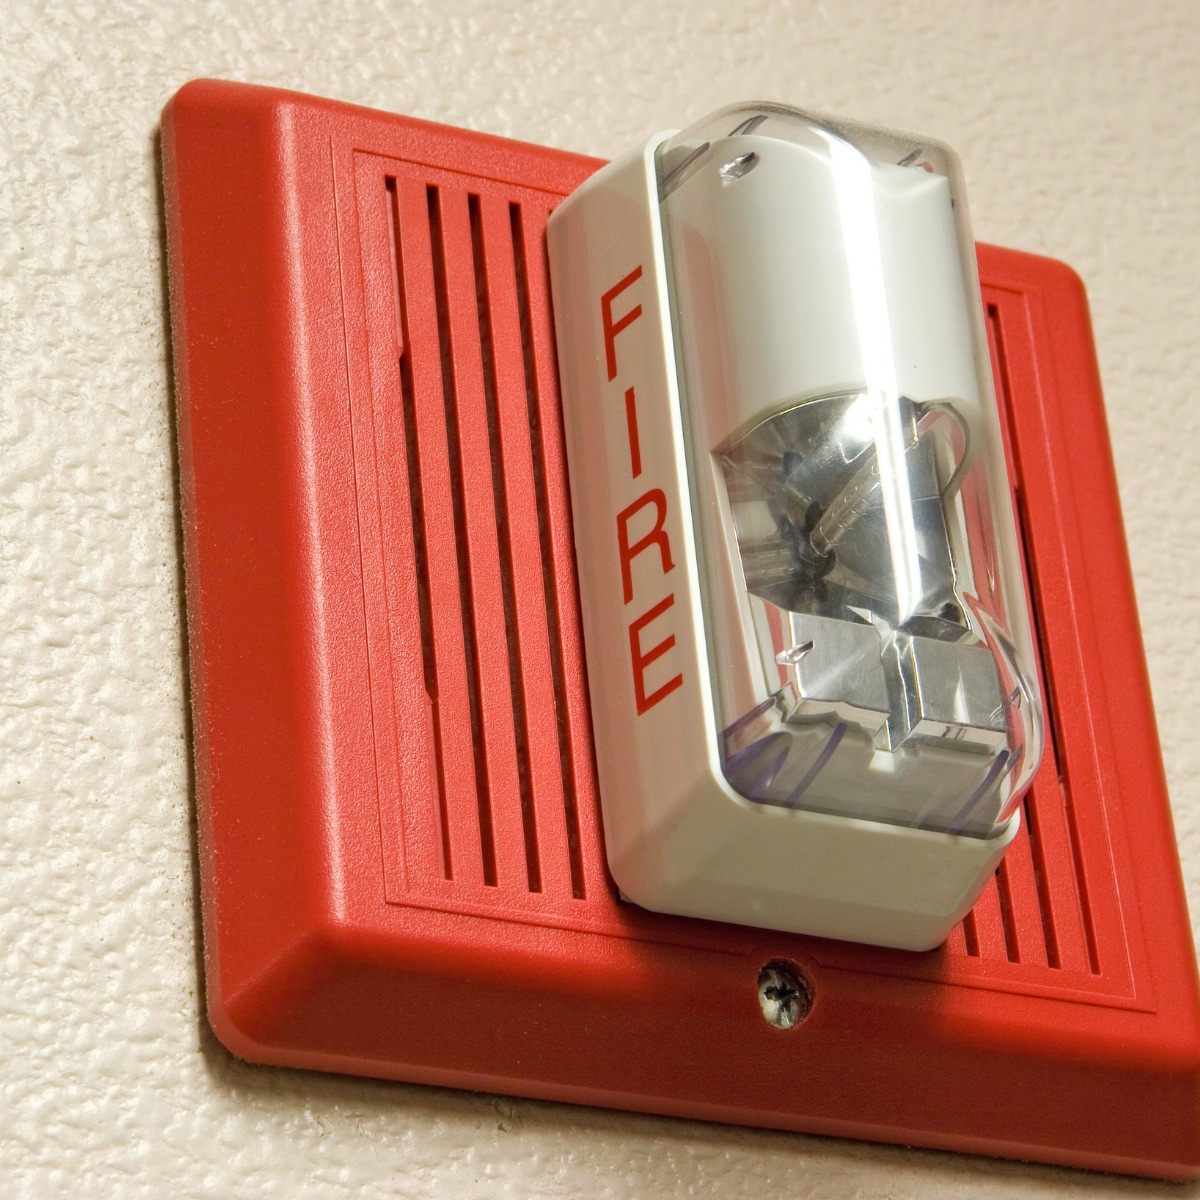 Ensuring Safety with Professional Fire Alarm Installation